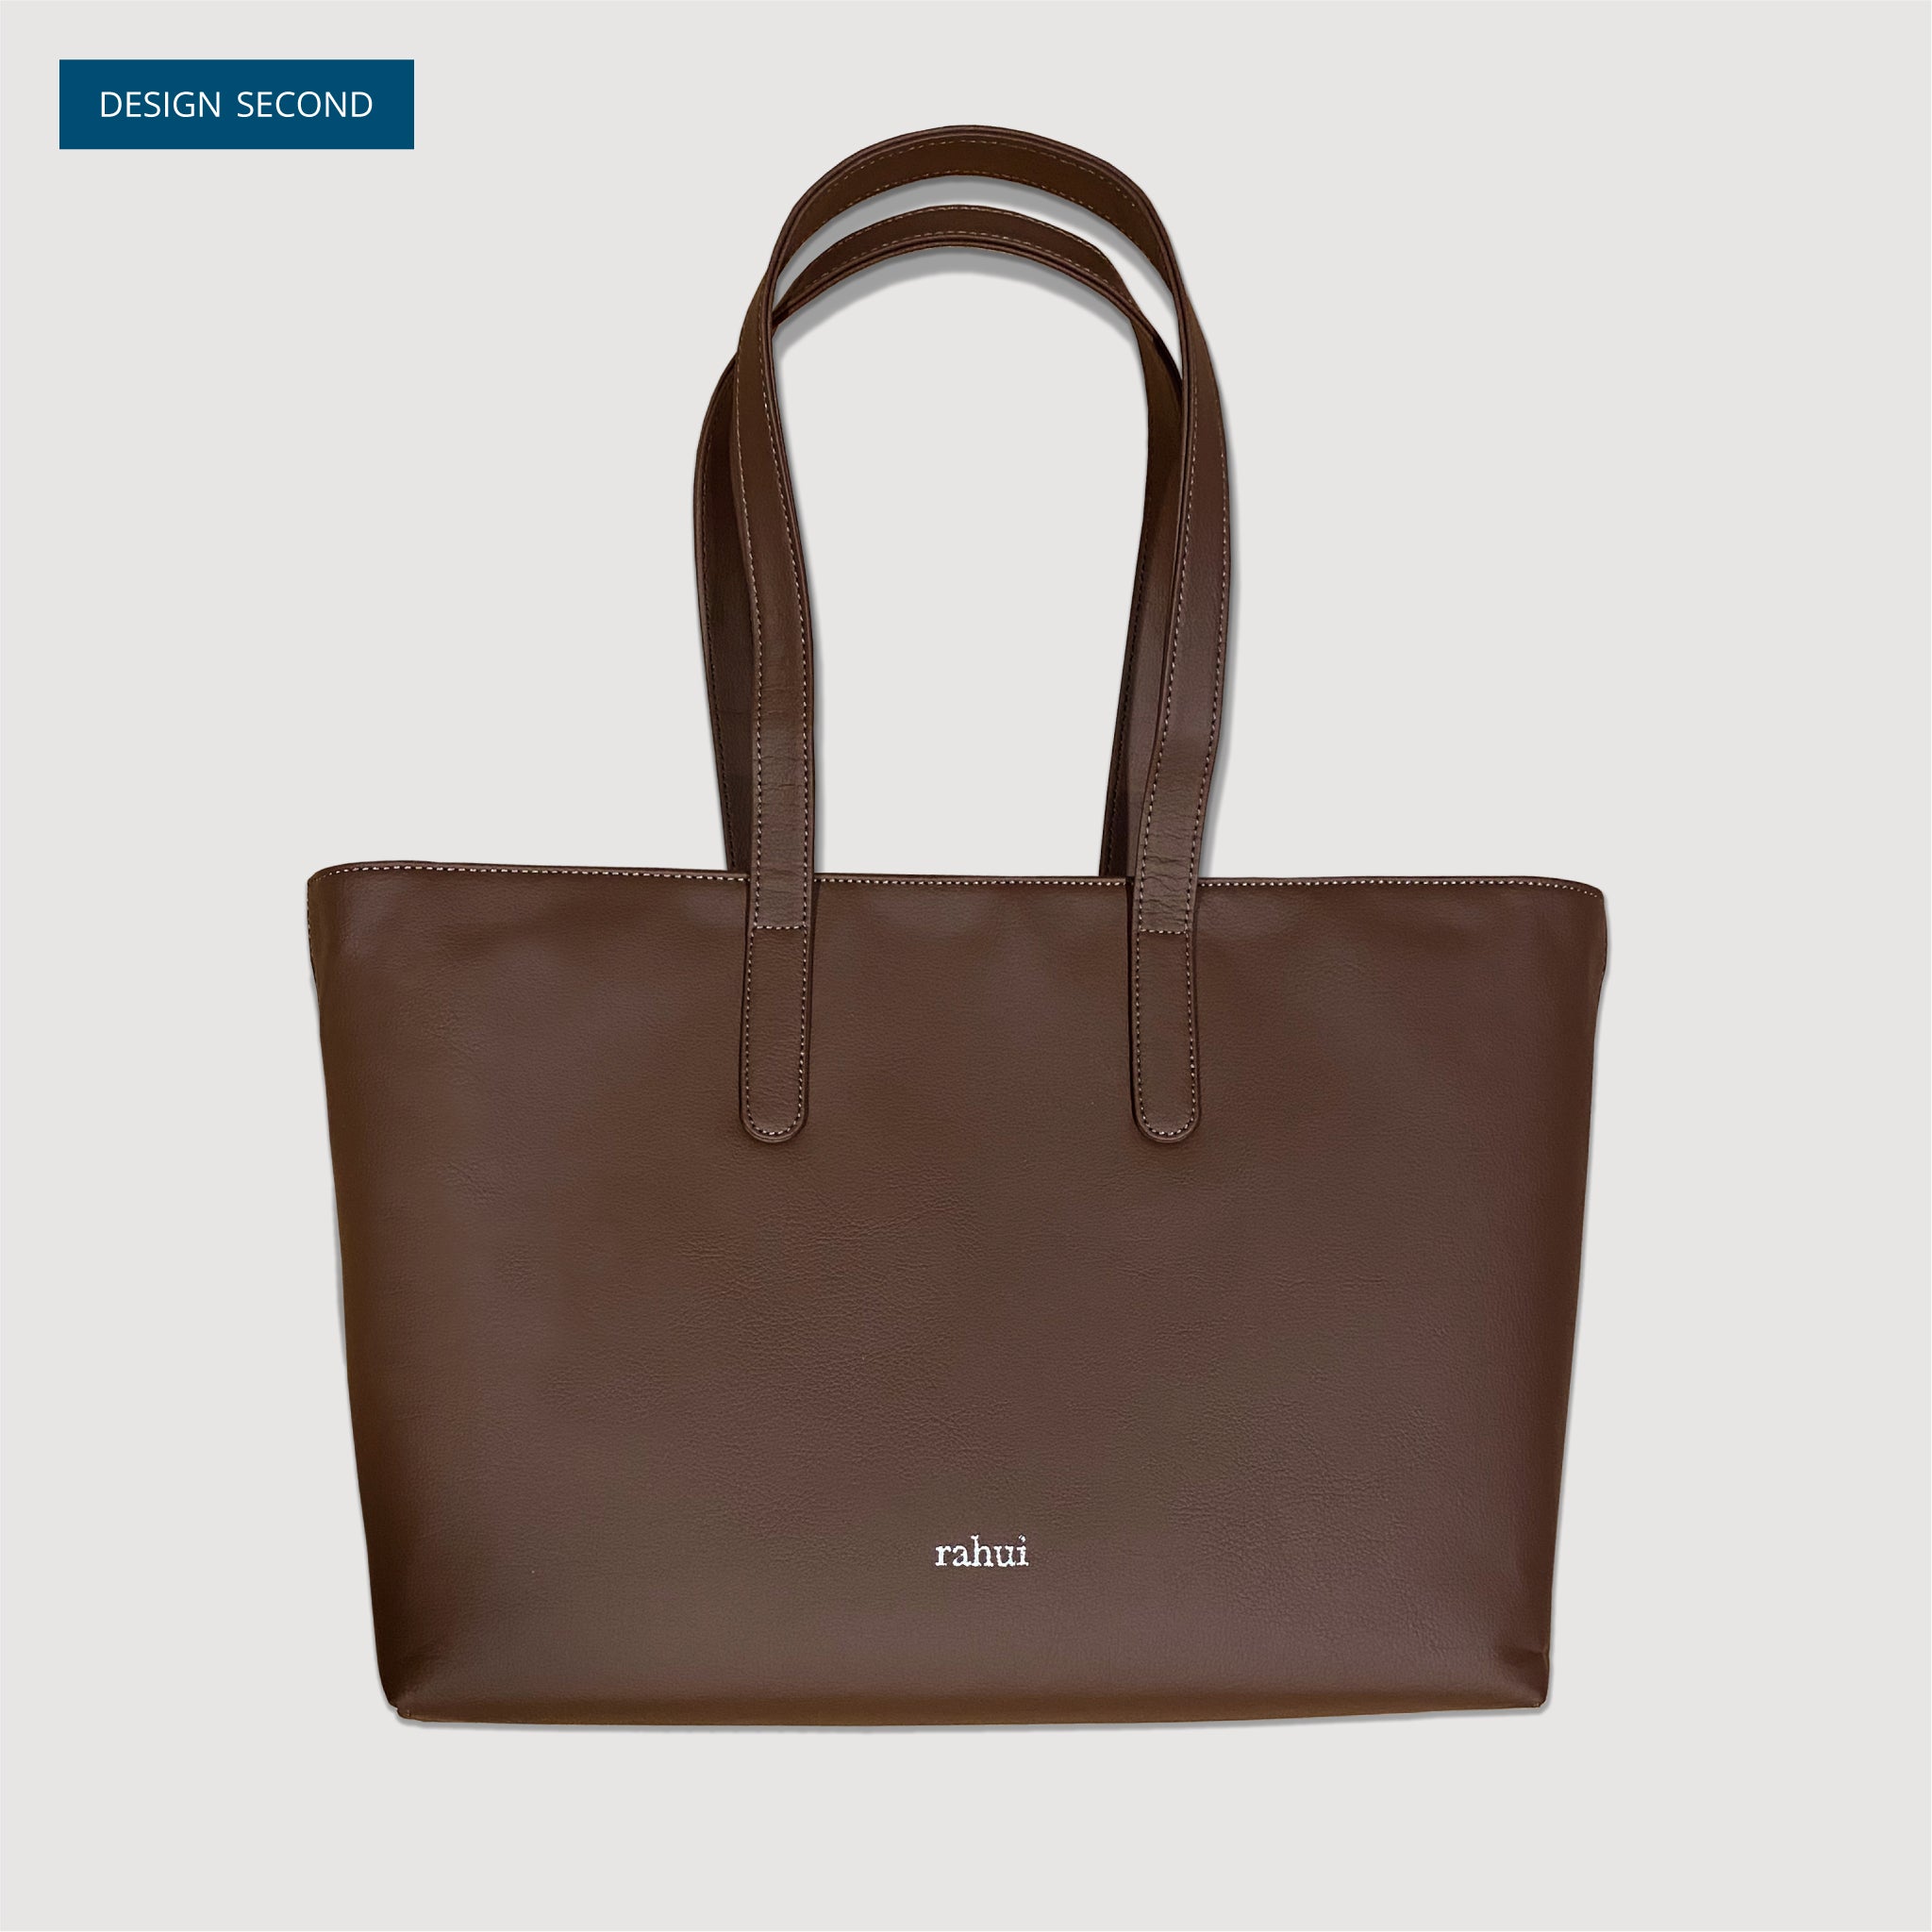 DesignSecond-BrownTote01a.jpg